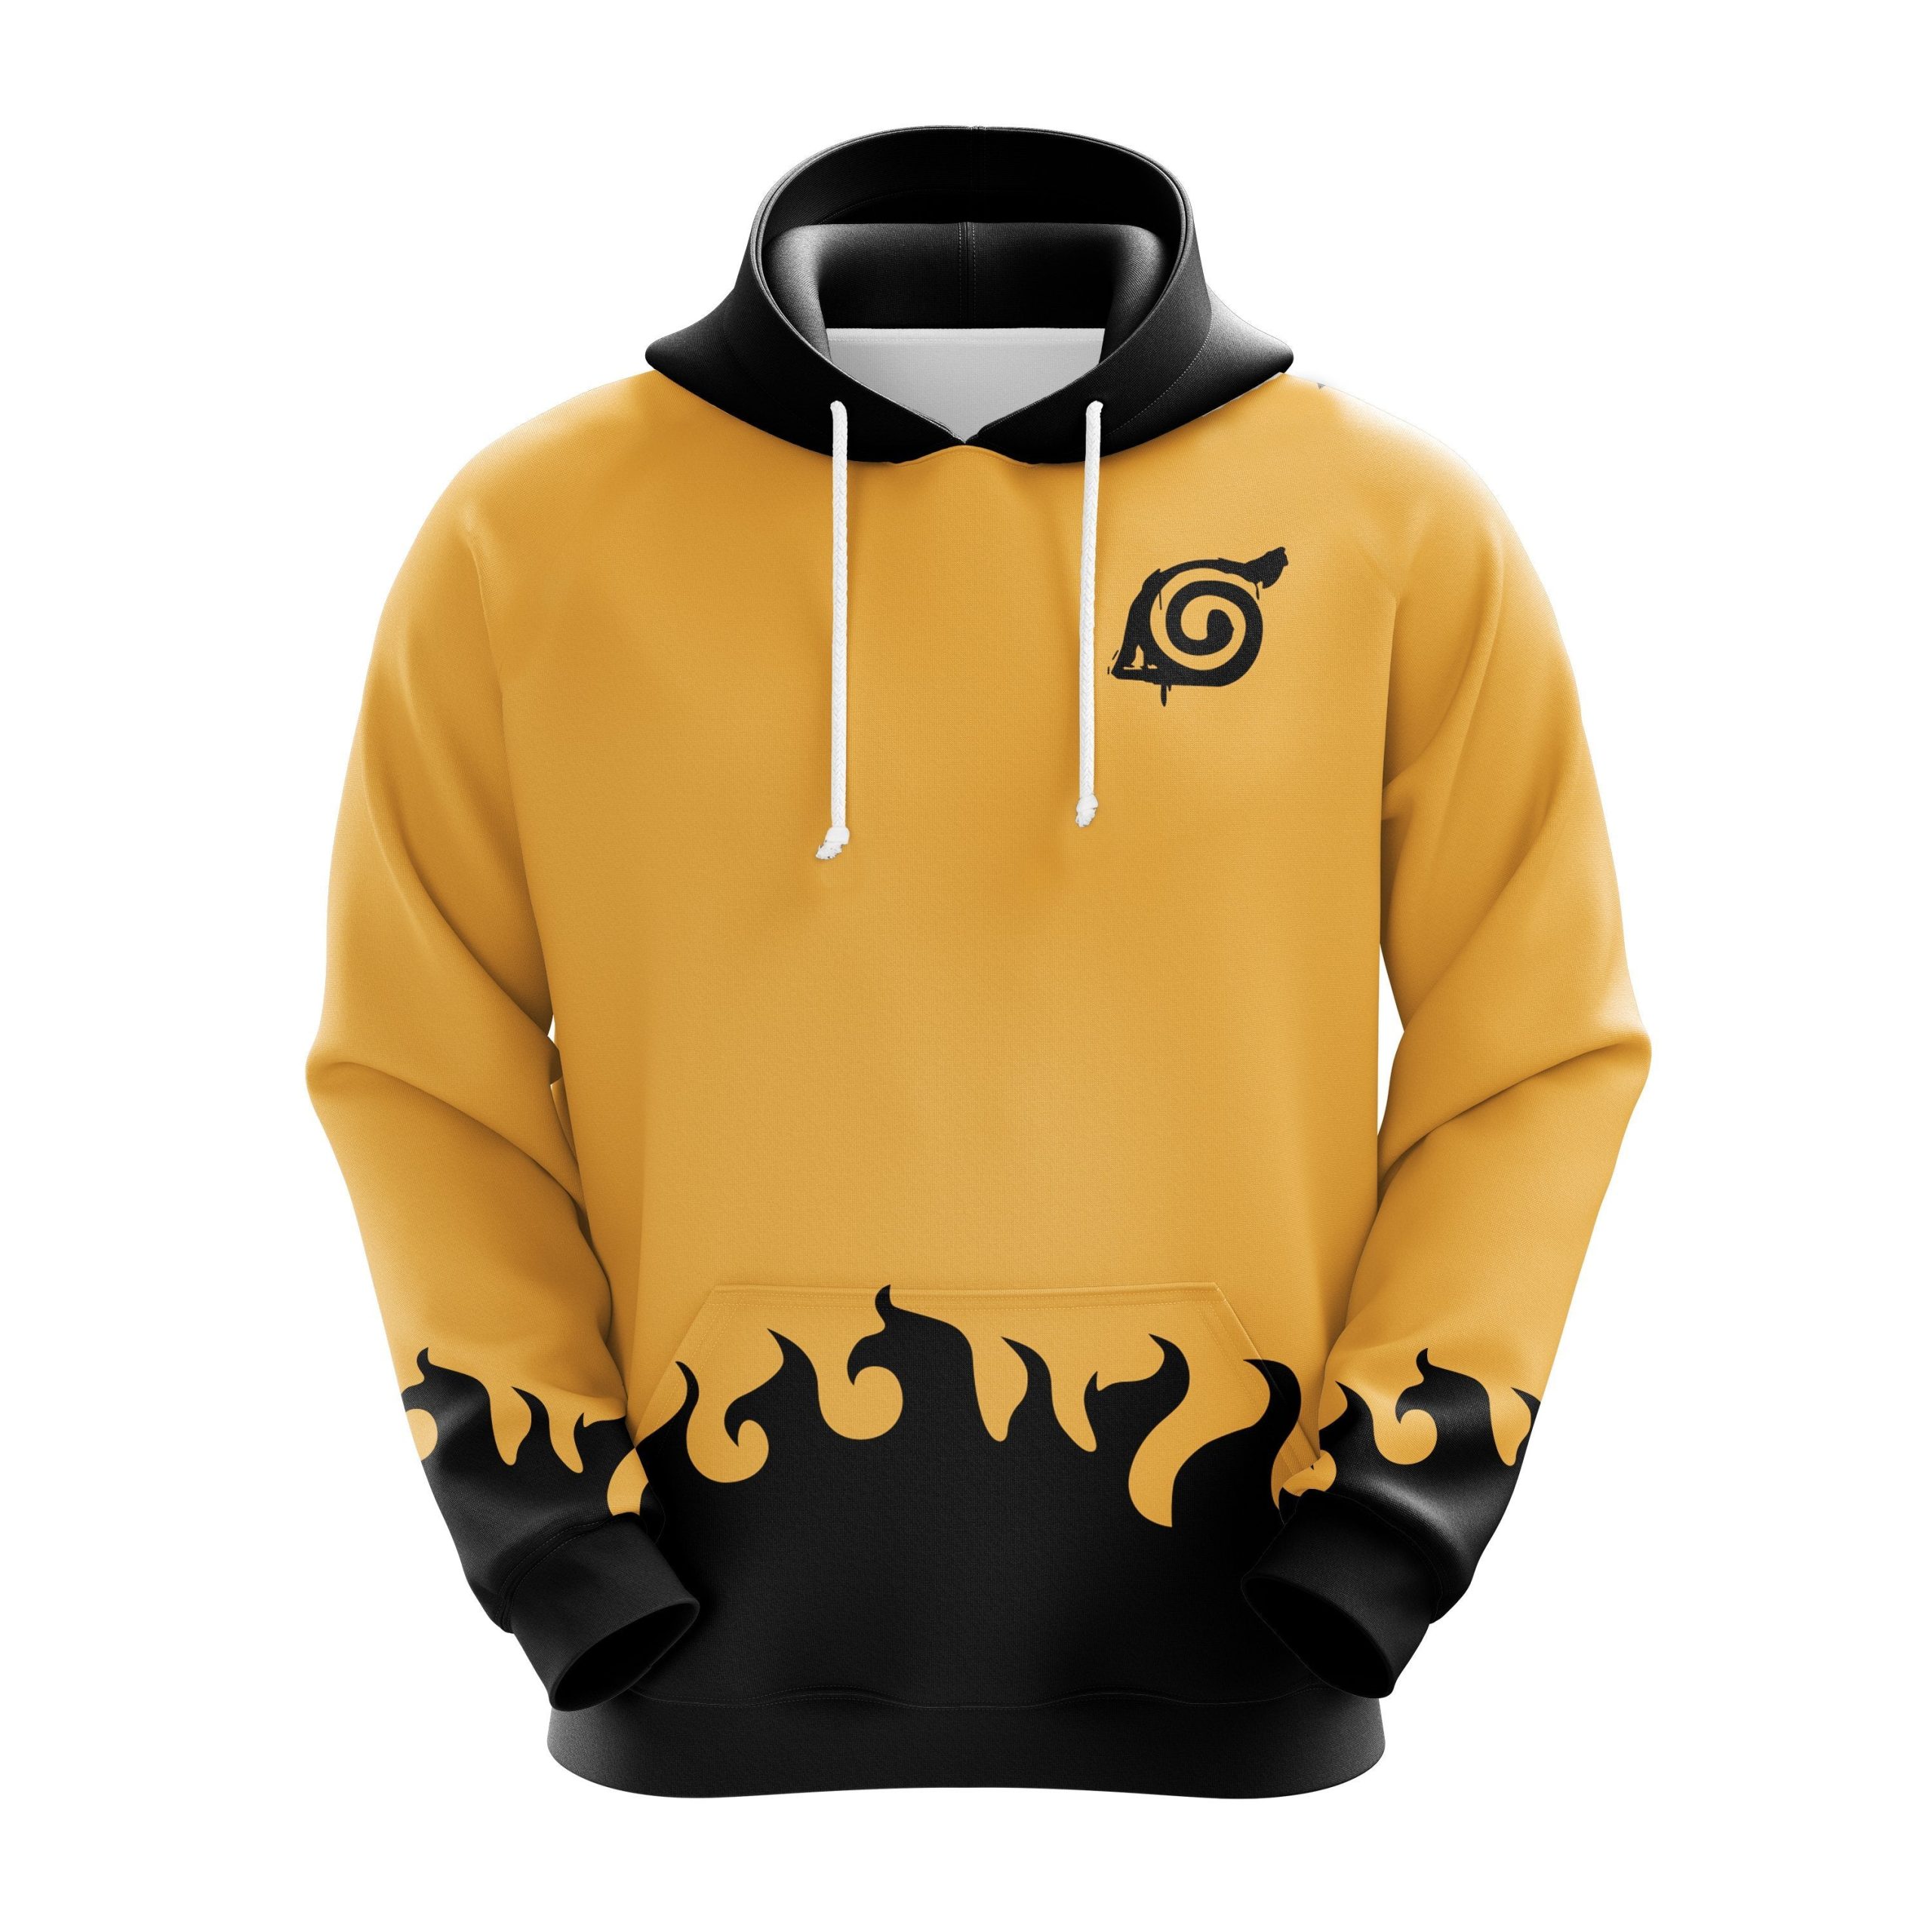 Naruto Outfit Cosplay Yellow Anime Hoodie Amazing Gift Idea